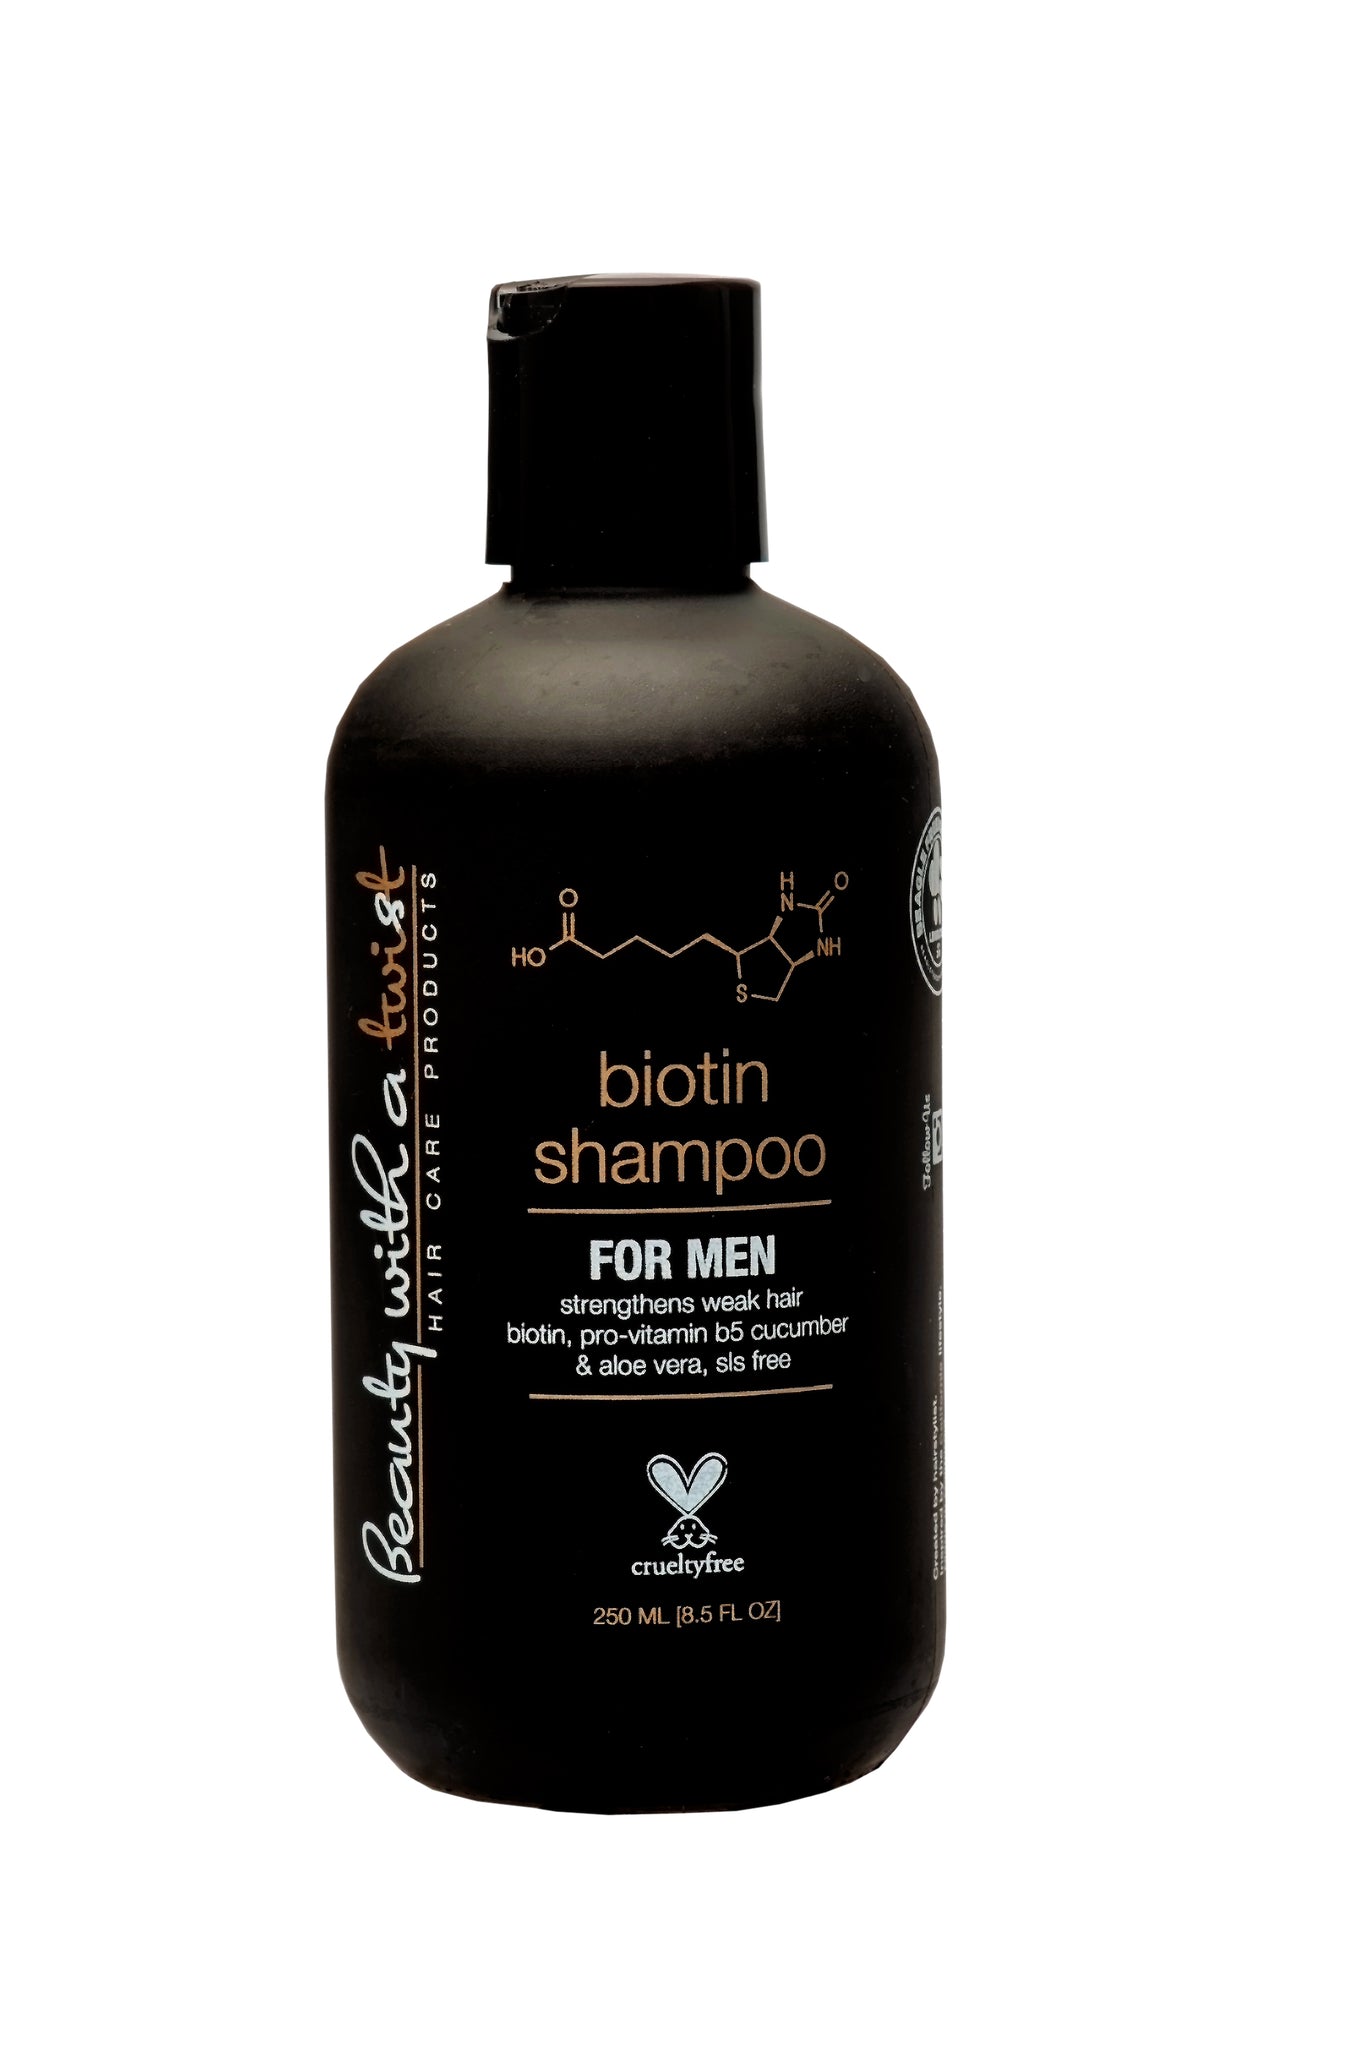 Biotin Hair Growth Shampoo for Men – Beauty with a Twist hair products